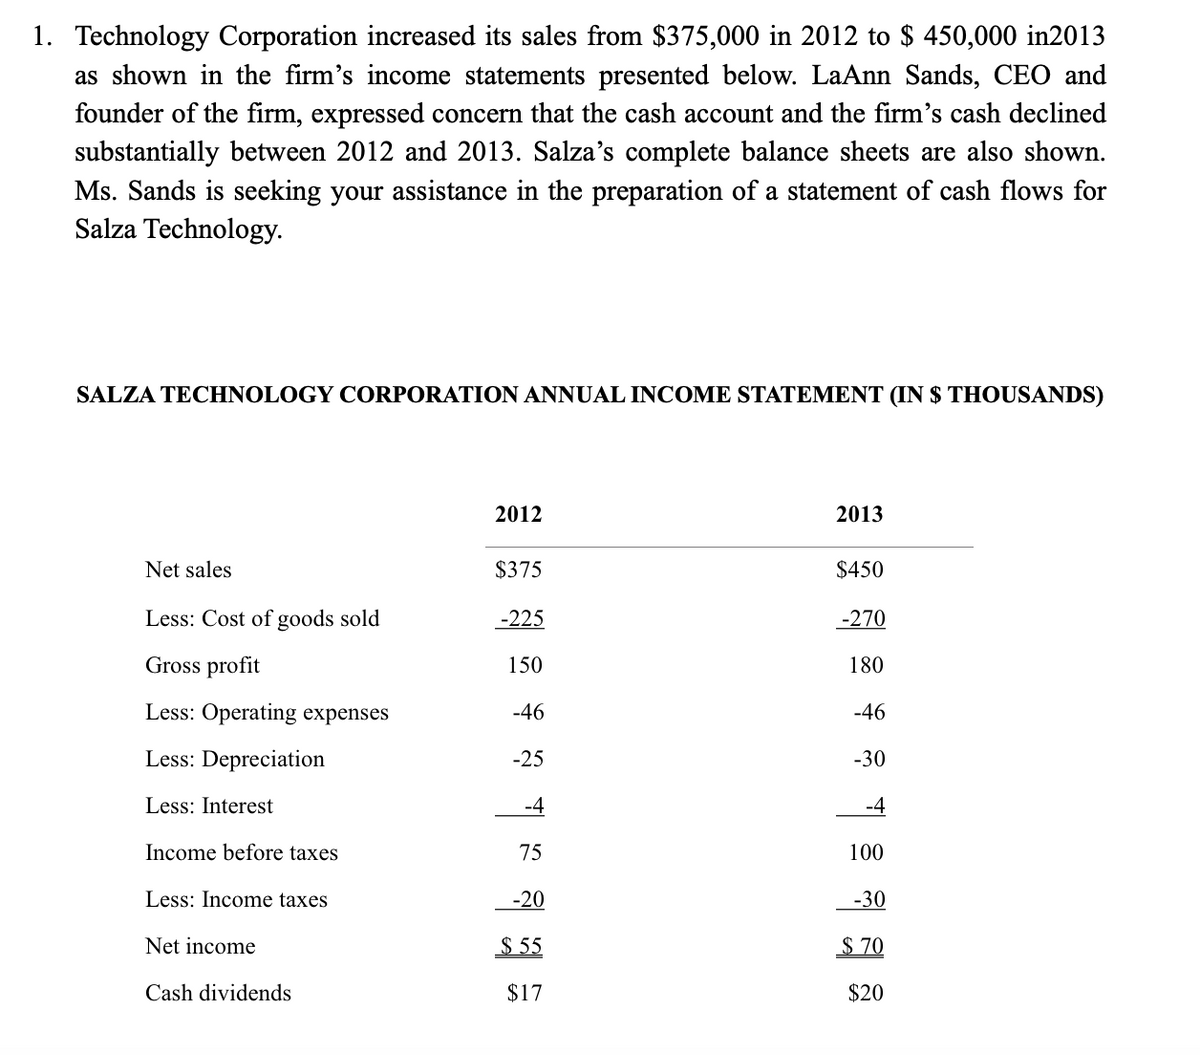 1. Technology Corporation increased its sales from $375,000 in 2012 to $ 450,000 in2013
as shown in the firm's income statements presented below. LaAnn Sands, CEO and
founder of the firm, expressed concern that the cash account and the firm's cash declined
substantially between 2012 and 2013. Salza's complete balance sheets are also shown.
Ms. Sands is seeking your assistance in the preparation of a statement of cash flows for
Salza Technology.
SALZA TECHNOLOGY CORPORATION ANNUAL INCOME STATEMENT (IN $ THOUSANDS)
2012
2013
Net sales
$375
$450
Less: Cost of goods sold
-225
-270
Gross profit
150
180
Less: Operating expenses
-46
-46
Less: Depreciation
-25
-30
Less: Interest
-4
-4
Income before taxes
75
100
Less: Income taxes
-20
-30
Net income
$ 55
$ 70
Cash dividends
$17
$20
